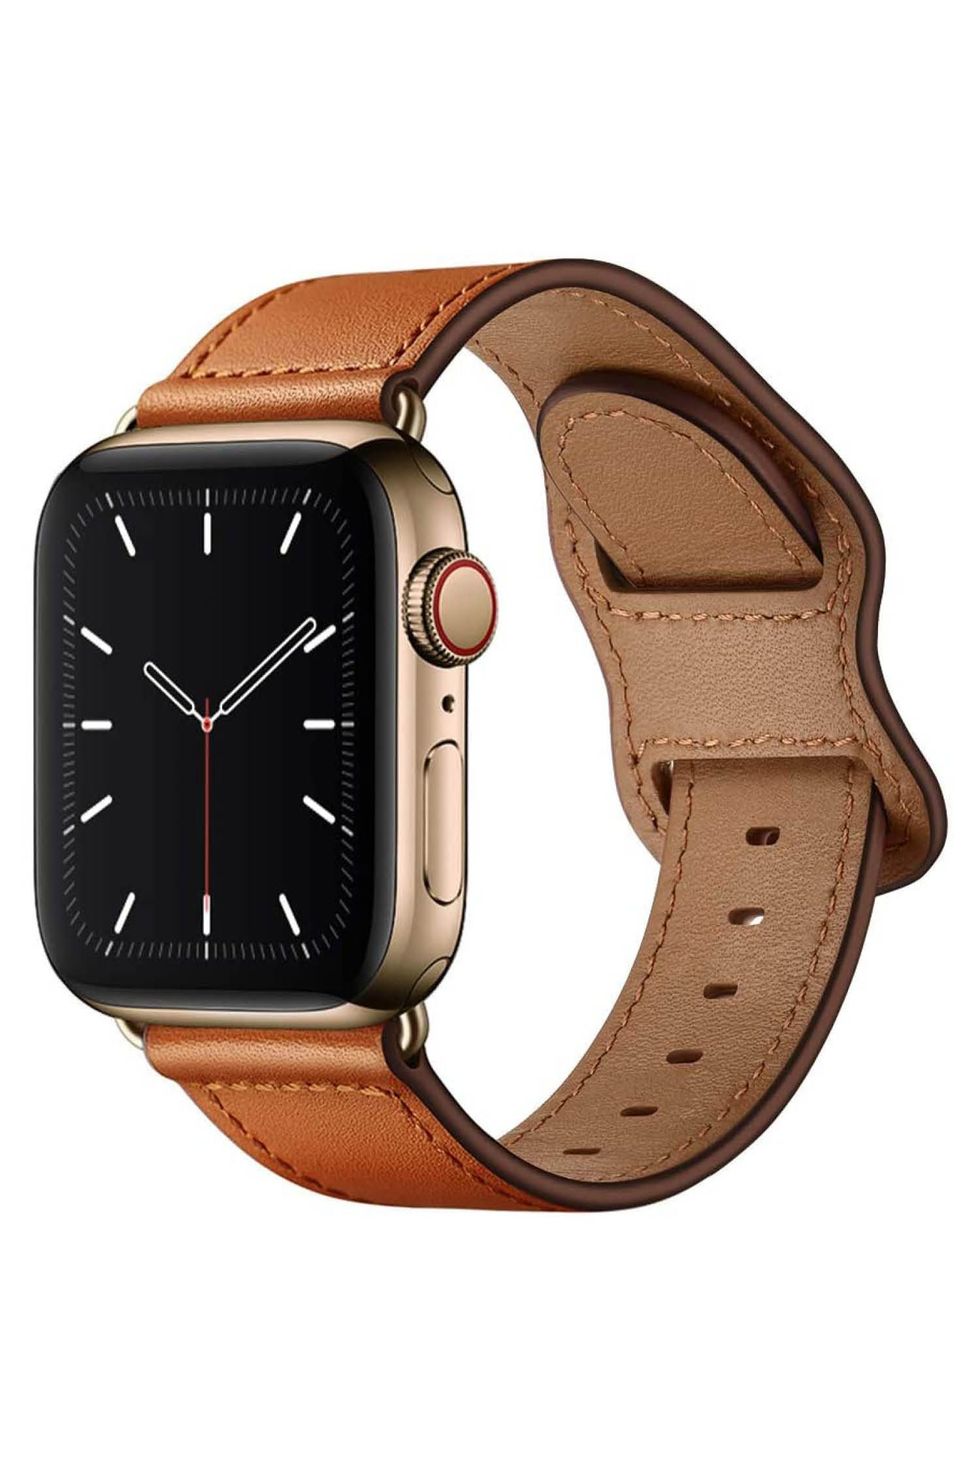 Apple Watch Band - iWatch Bands 38mm Genuine Leather Strap iPhone Smart  Watch Band Bracelet Replacement Wristband with Stainless Steel Adapter  Metal Clasp for Apple